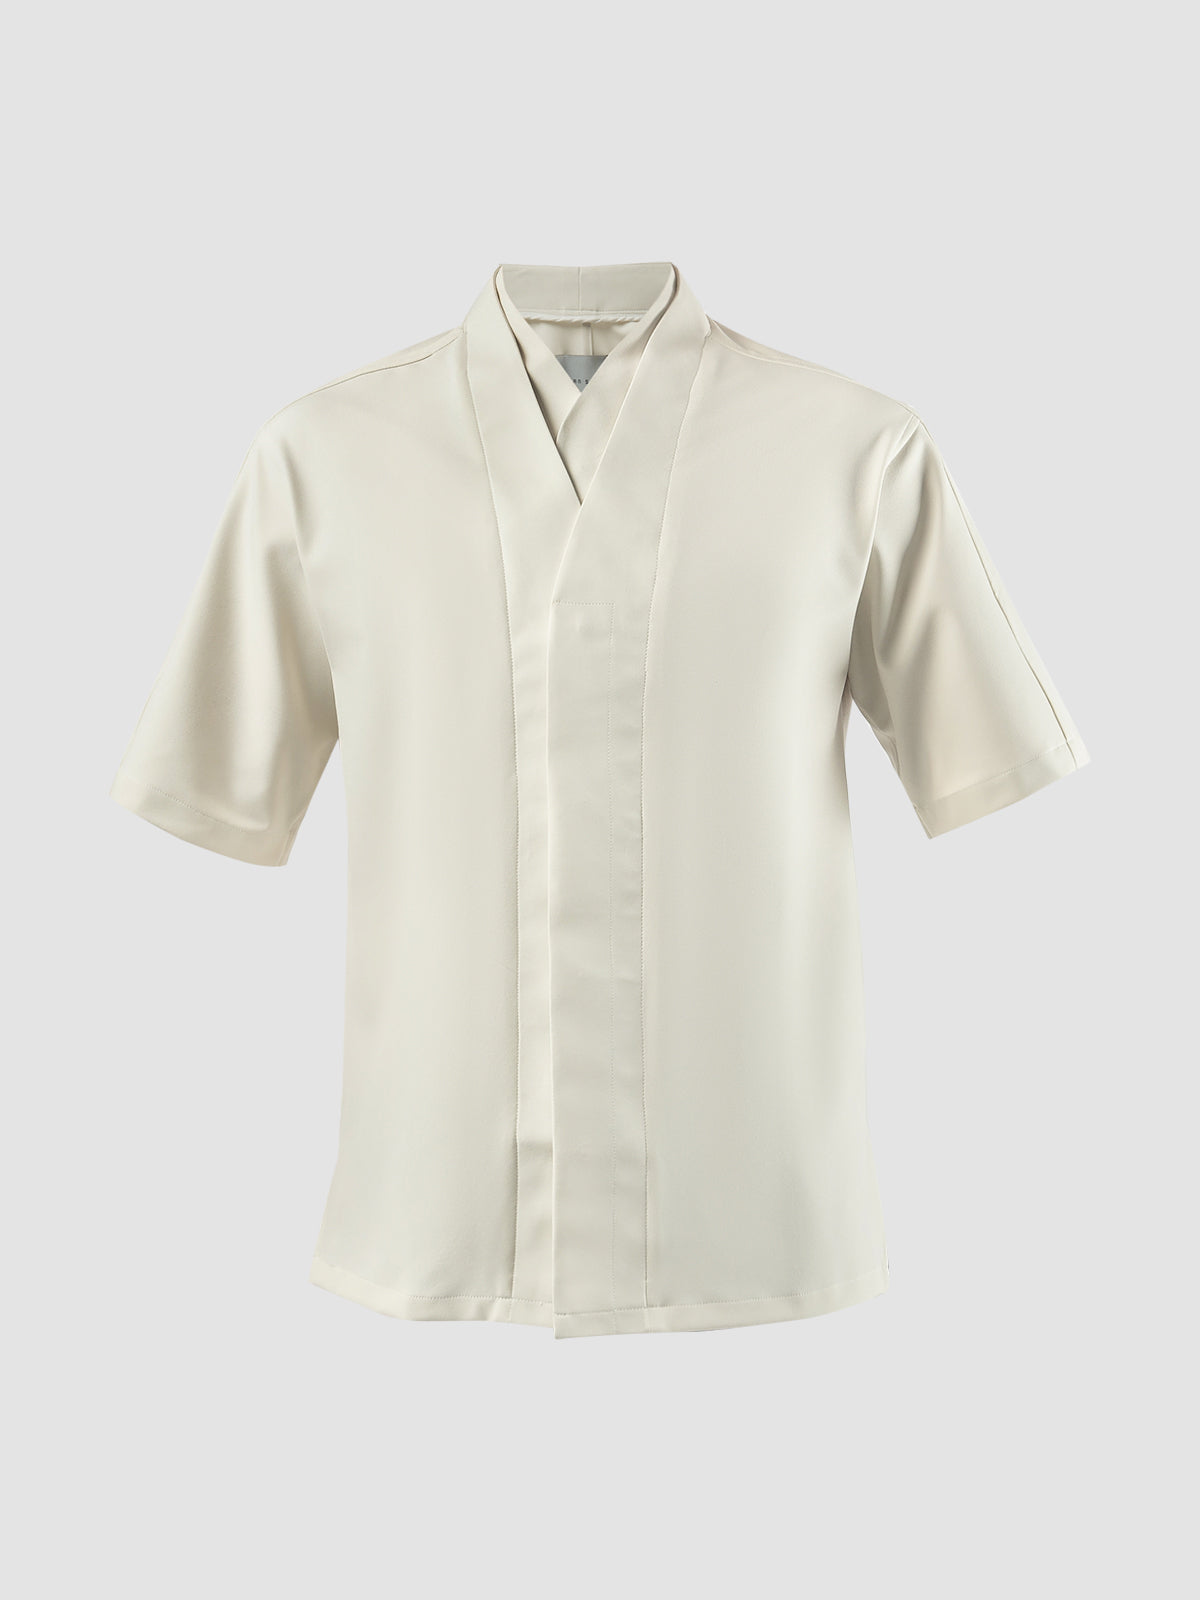 Ivory Part 5 loose shirt with double collar